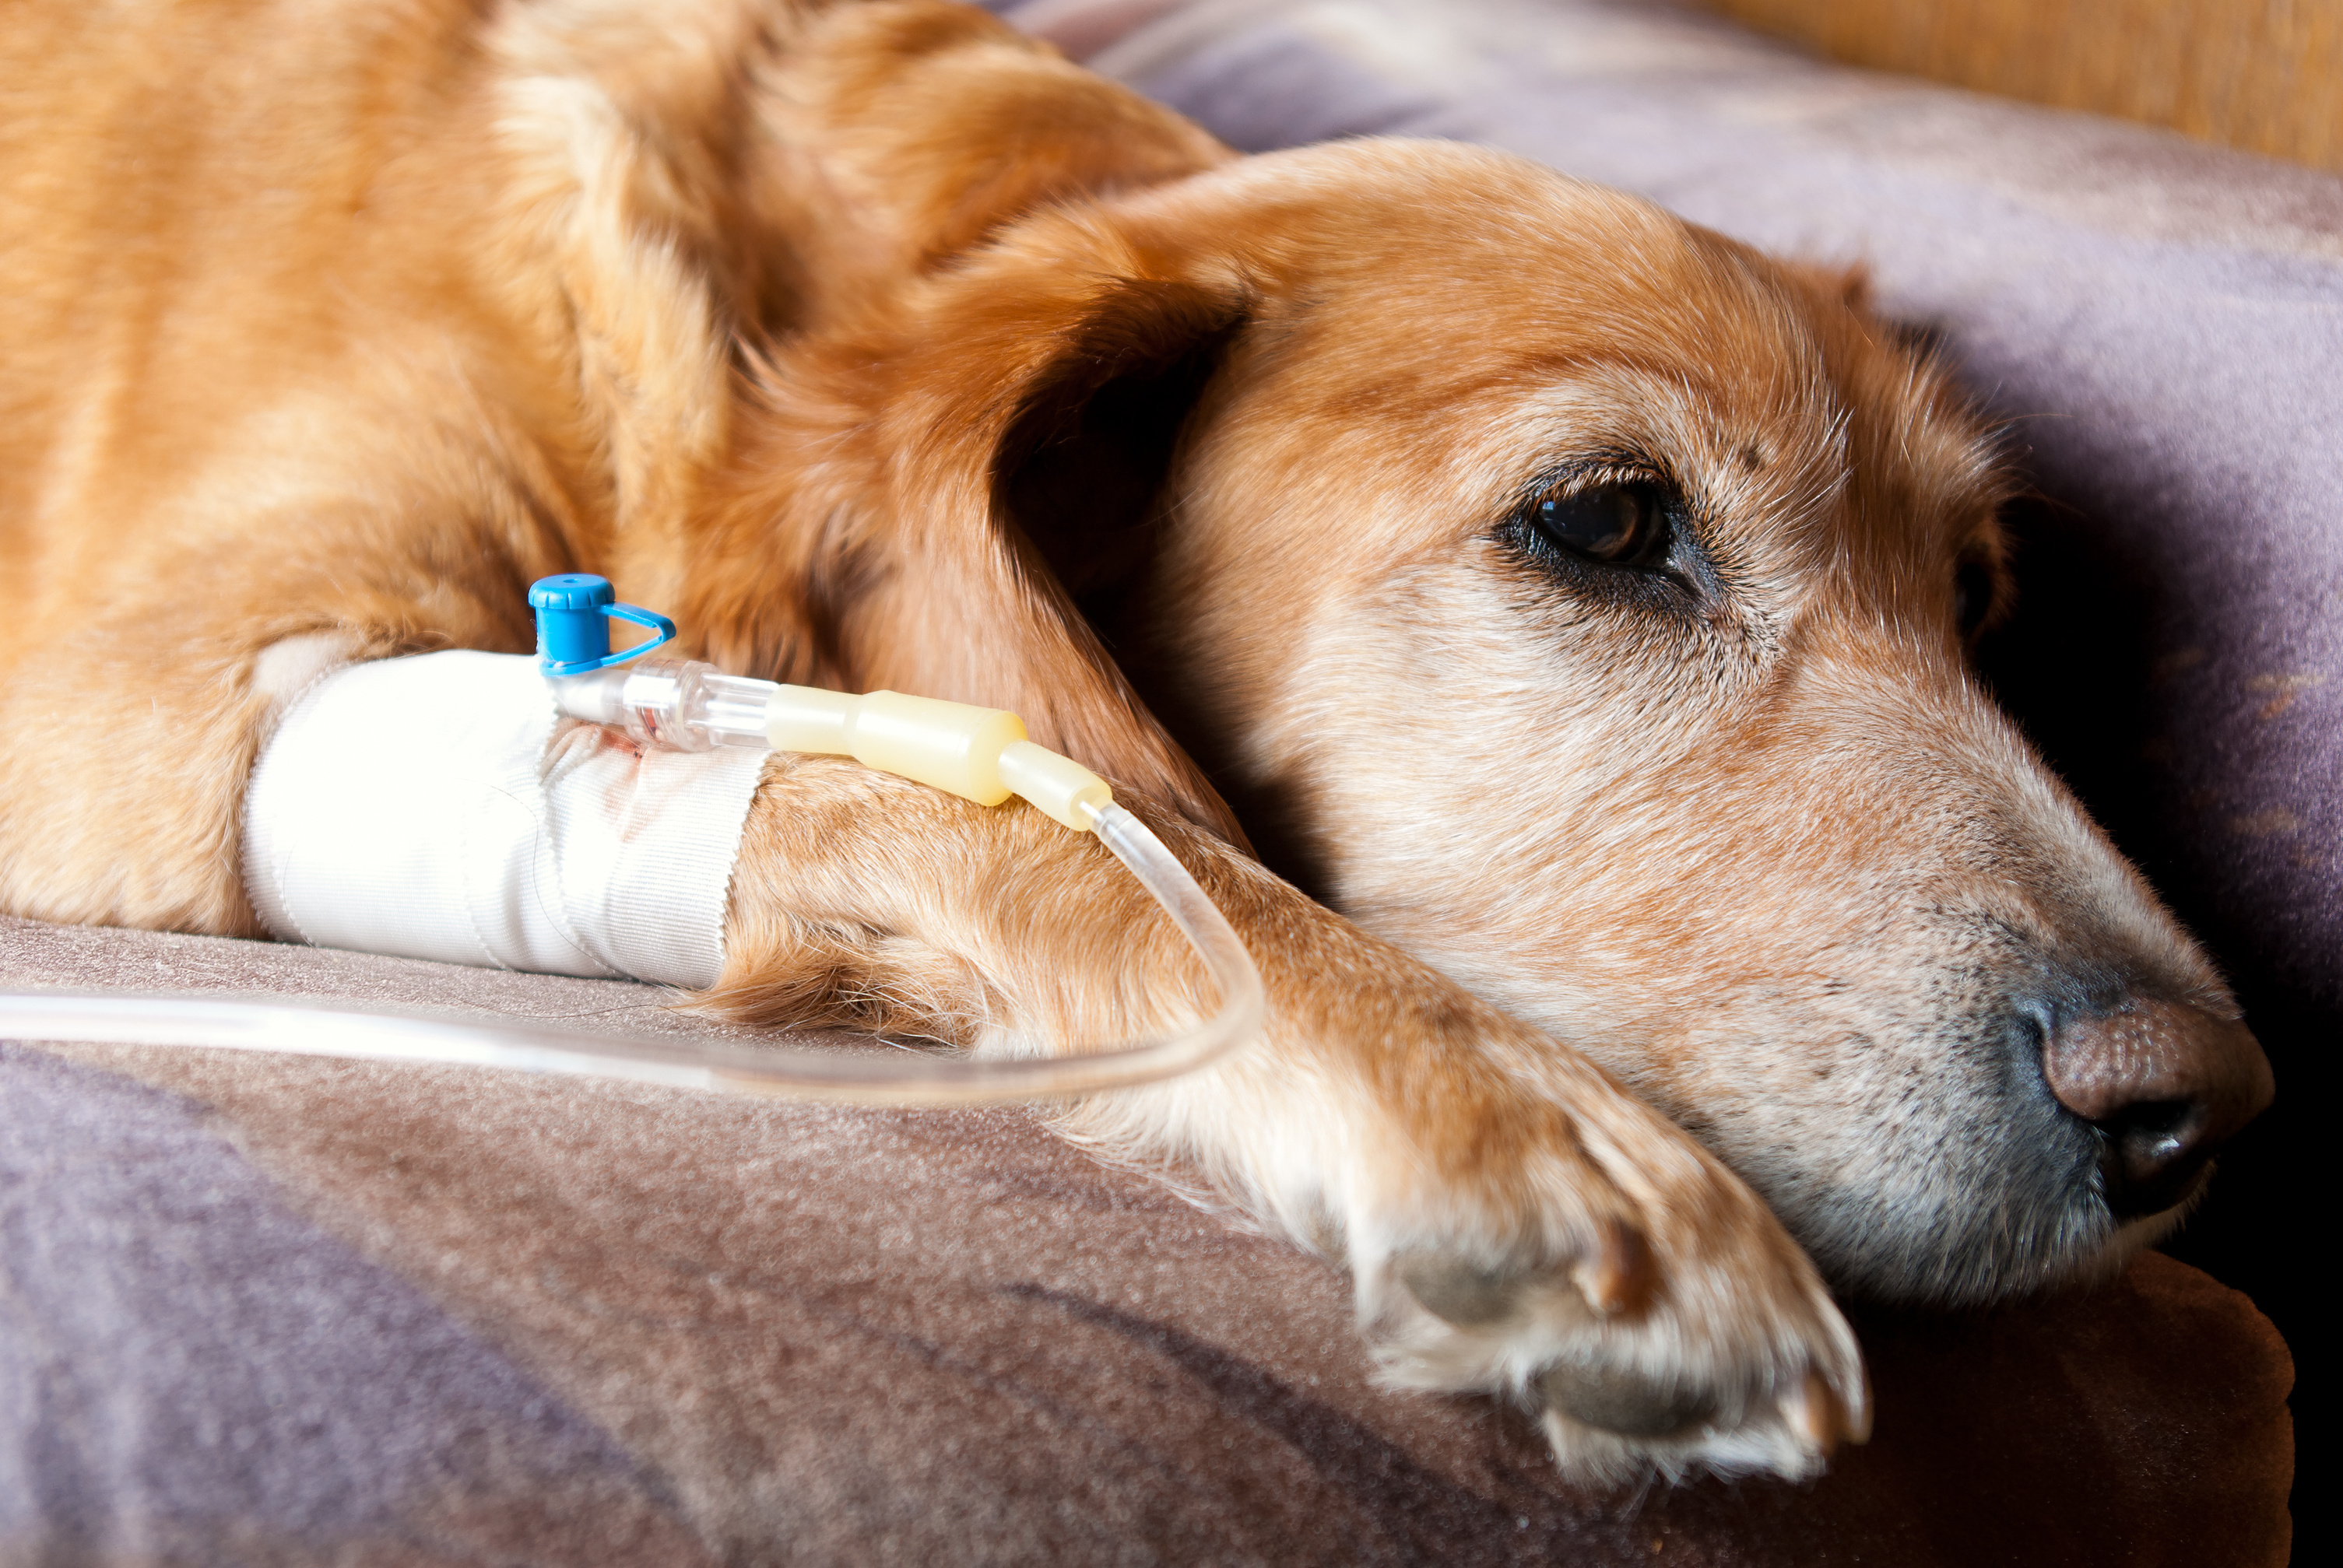 Dog receives medication, clarifies treatment options for kidney failure.